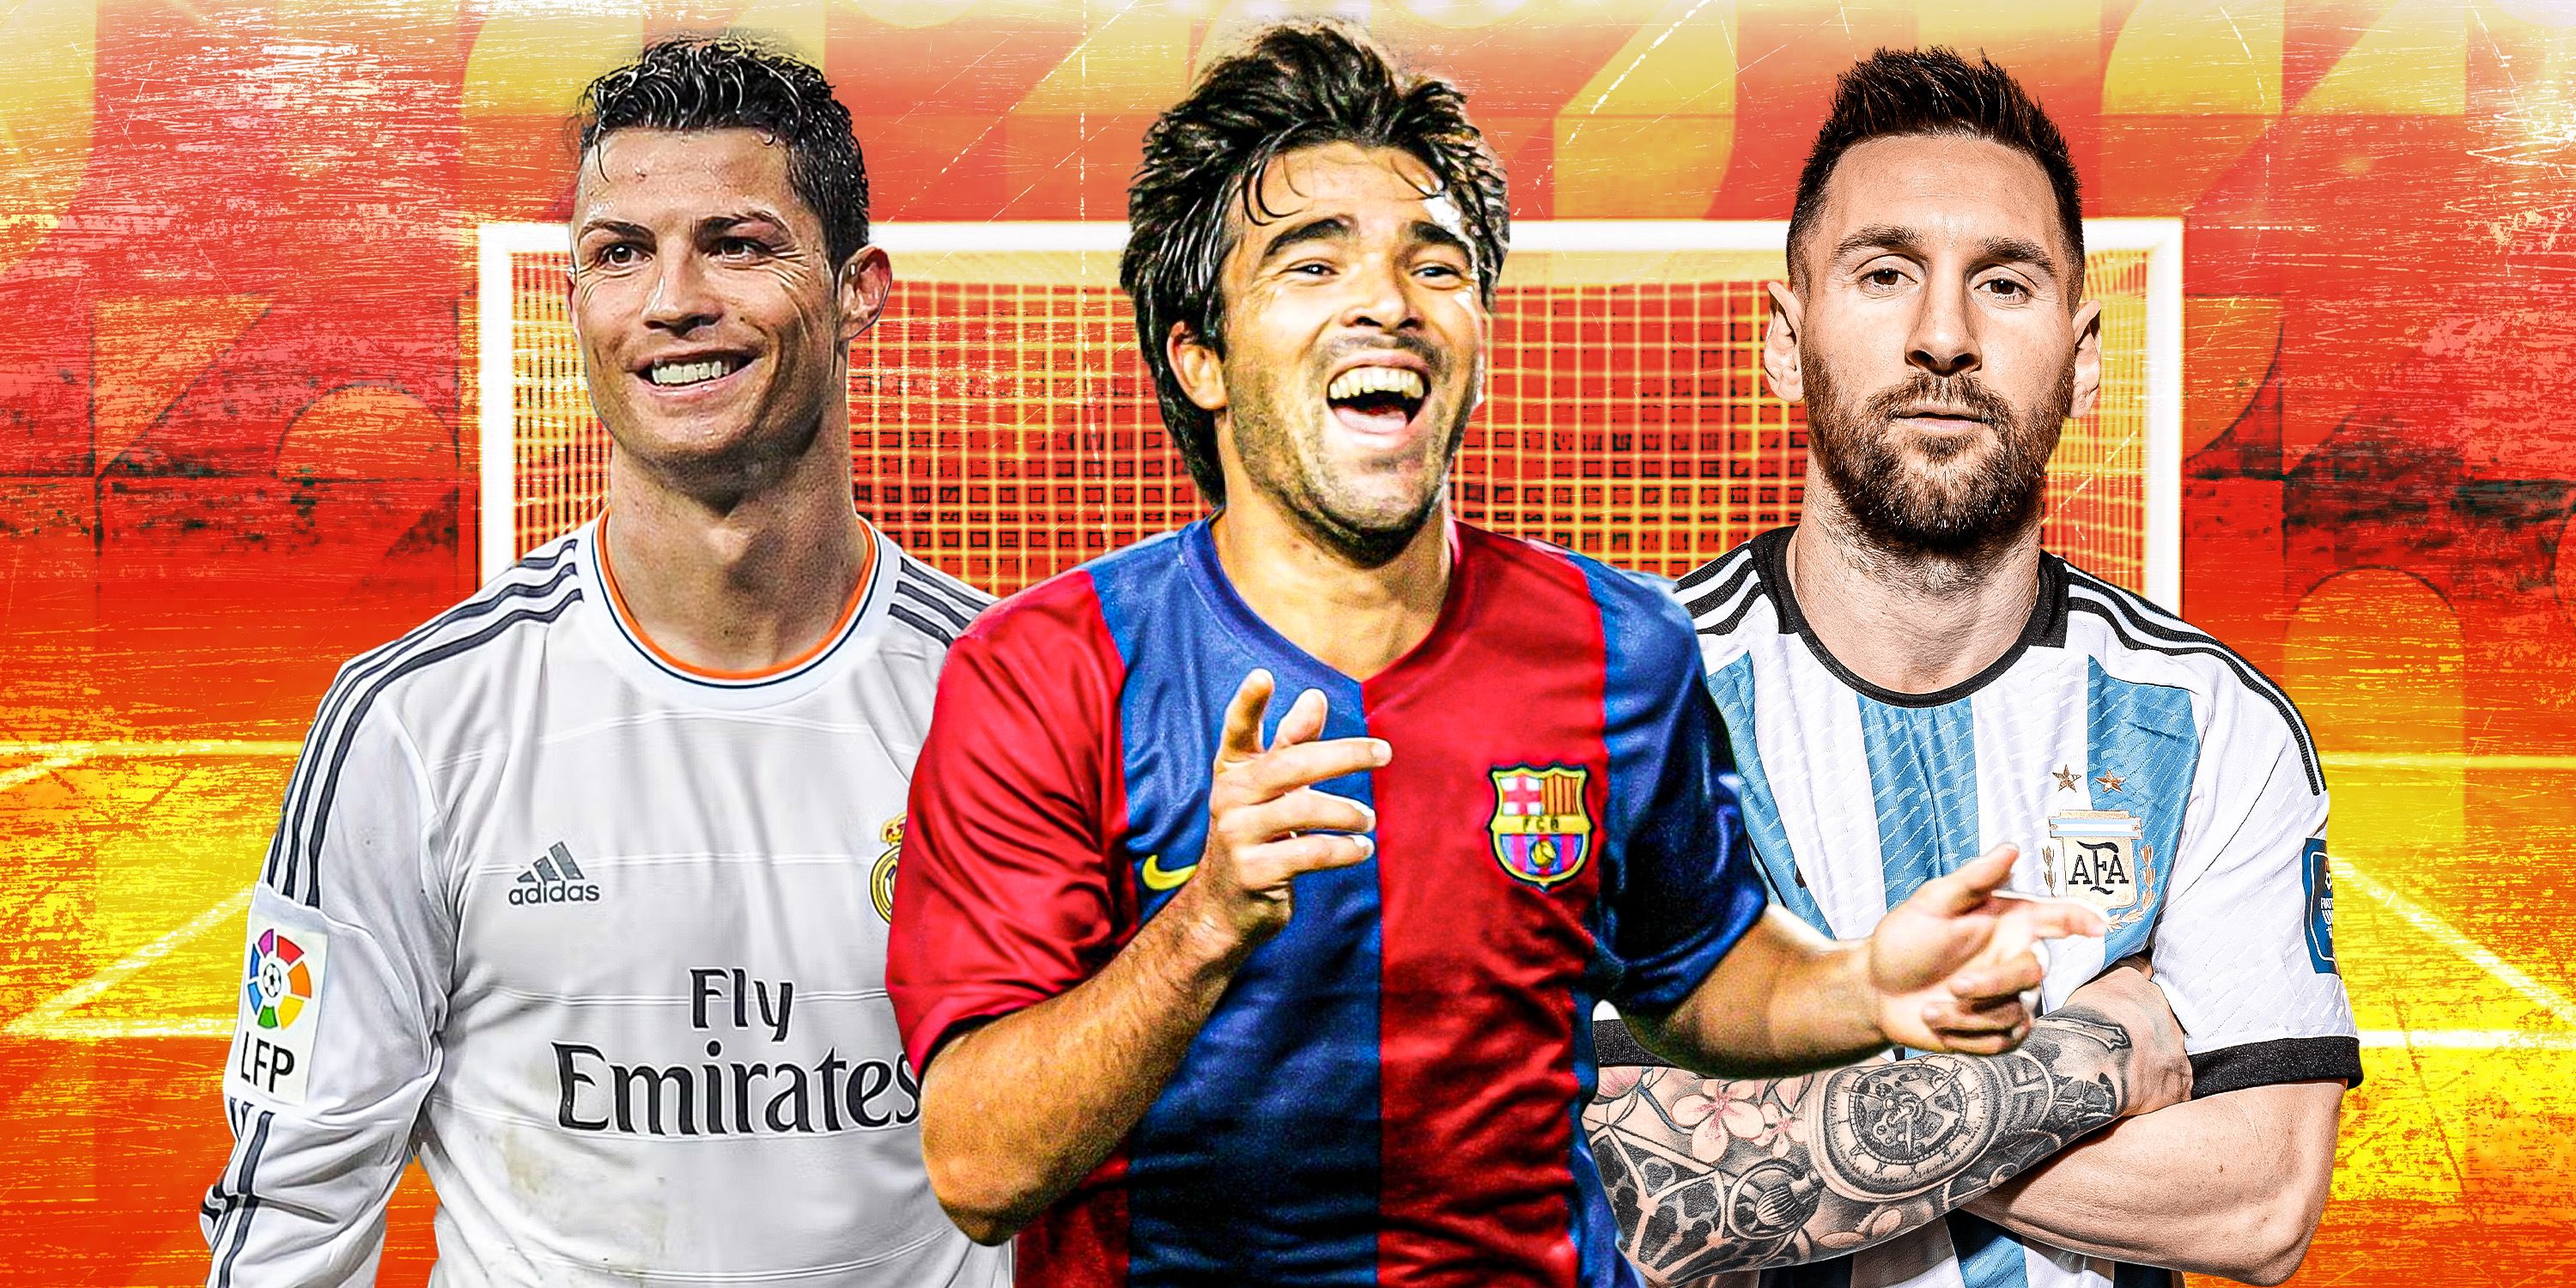 Deco (Barcelona) with Messi (Argentina) and Ronaldo (Real Madrid)